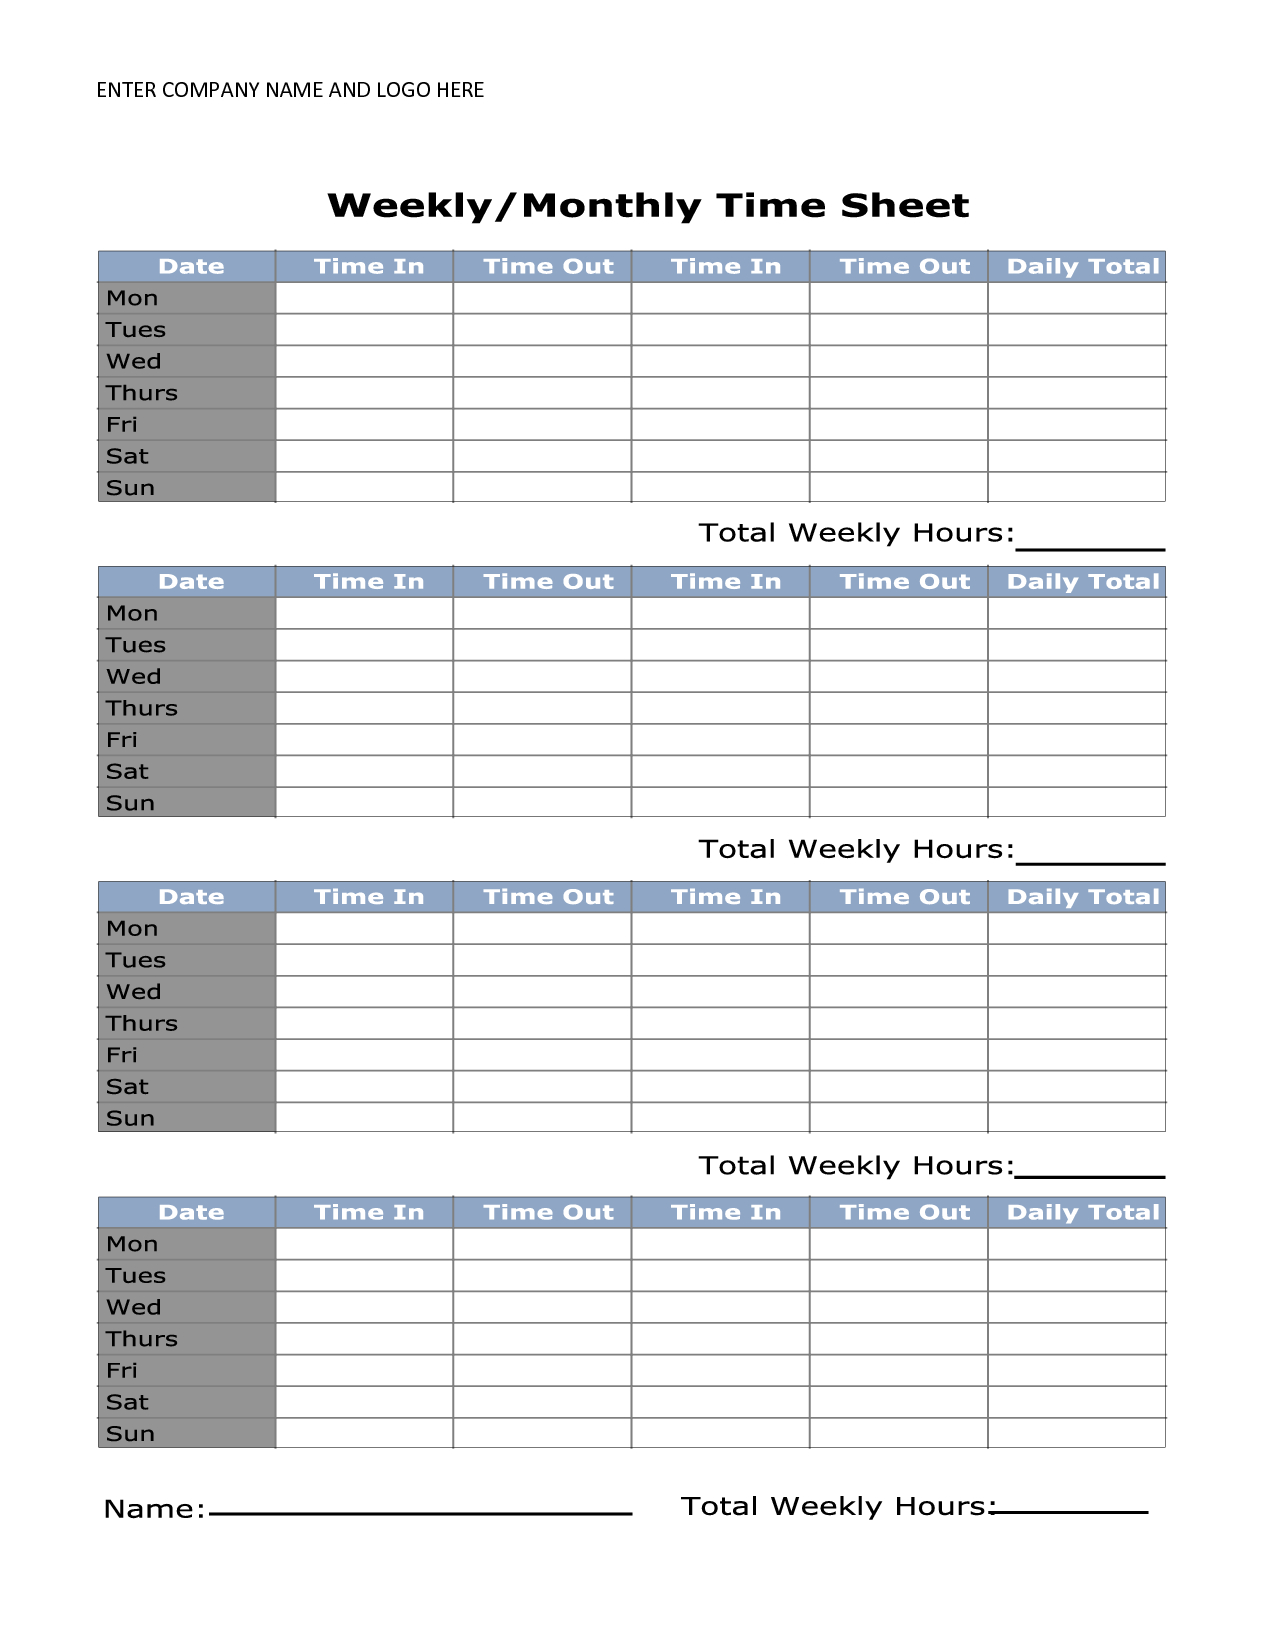 Free Printable Monthly Time Sheets | Time Sheet | Timesheet Template - Monthly Timesheet Template Free Printable